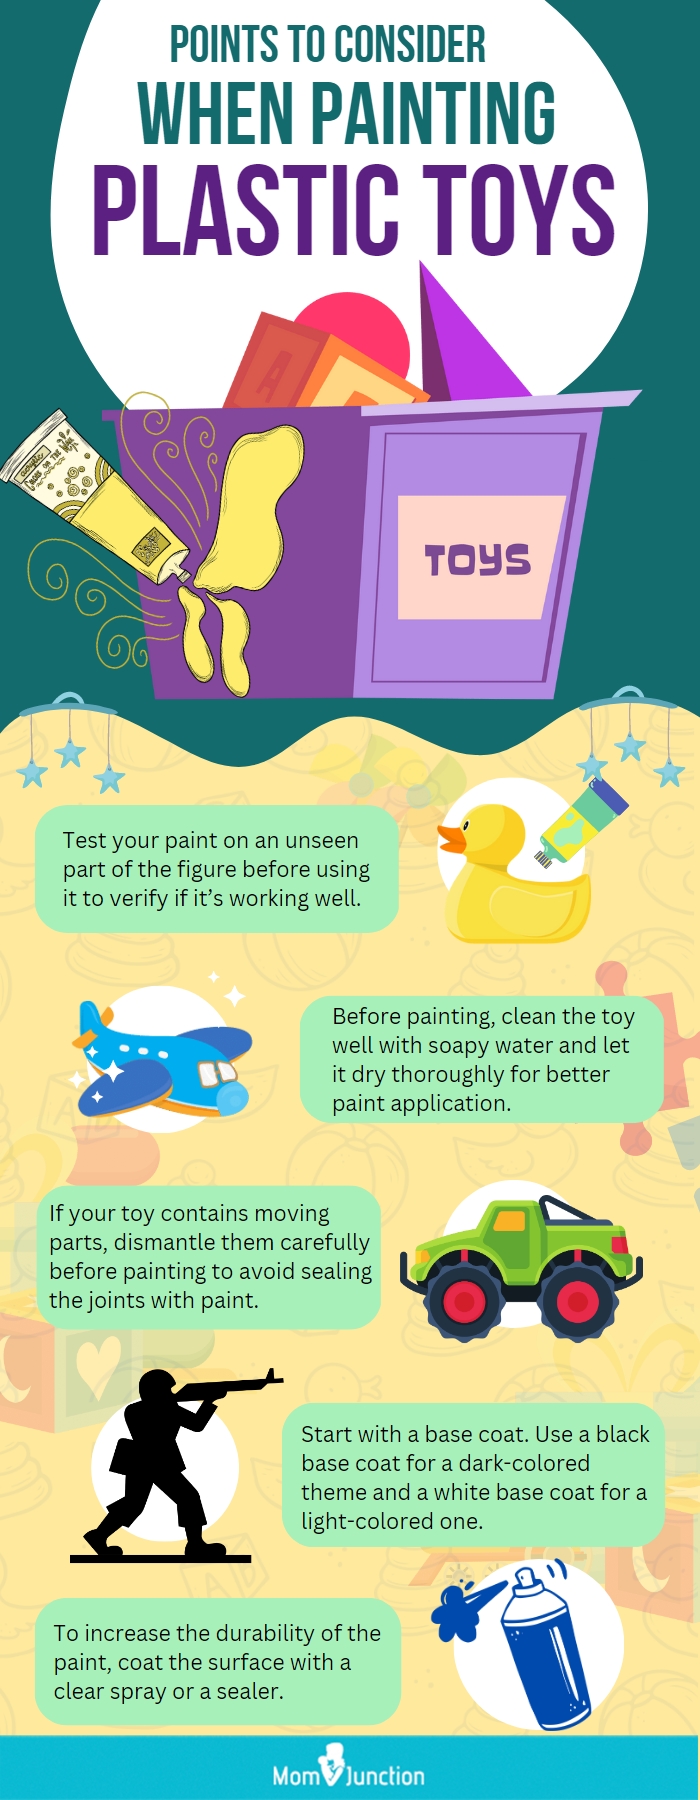 Points To Consider When Painting Plastic Toys 279 Content topics (Infographic)